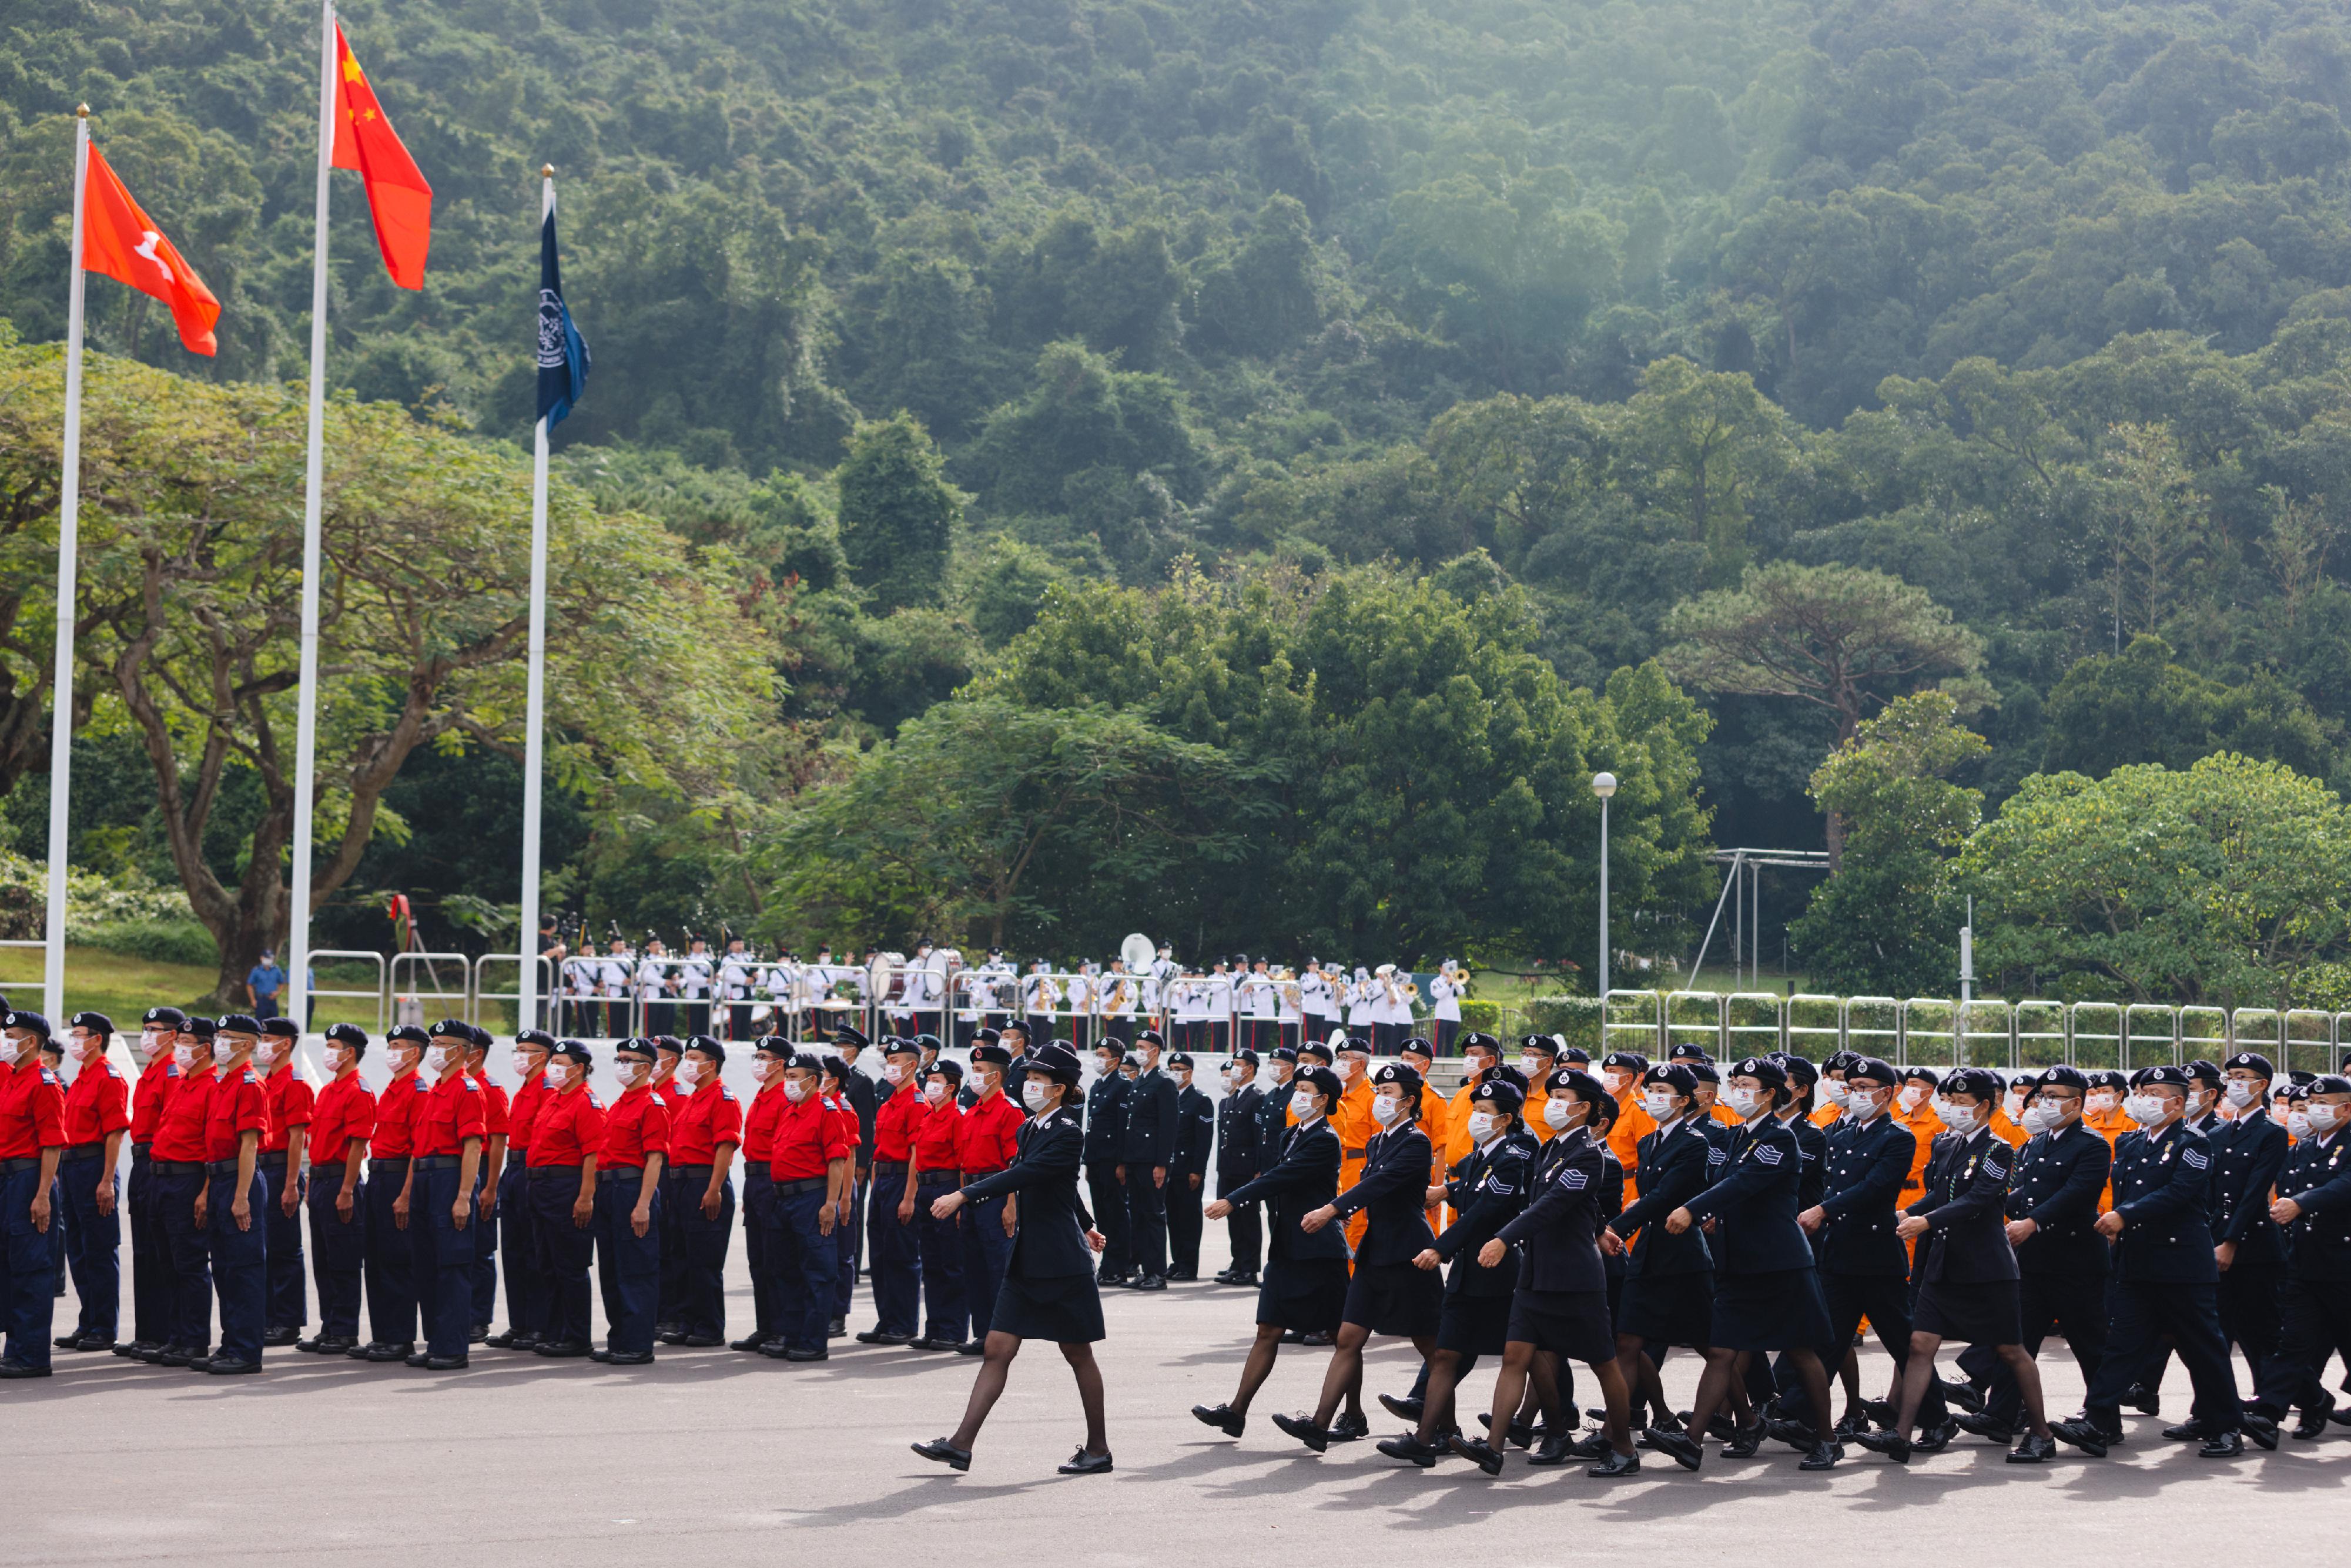 The Civil Aid Service (CAS) held the "Celebration of the 25th Anniversary of the Establishment of HKSAR and CAS 70th Anniversary Parade" today (November 27) at the Hong Kong Police College. Photo shows the CASfully adopting the Chinese-style foot drill and drill commands in Putonghua at the Parade to demonstrate national identity.
